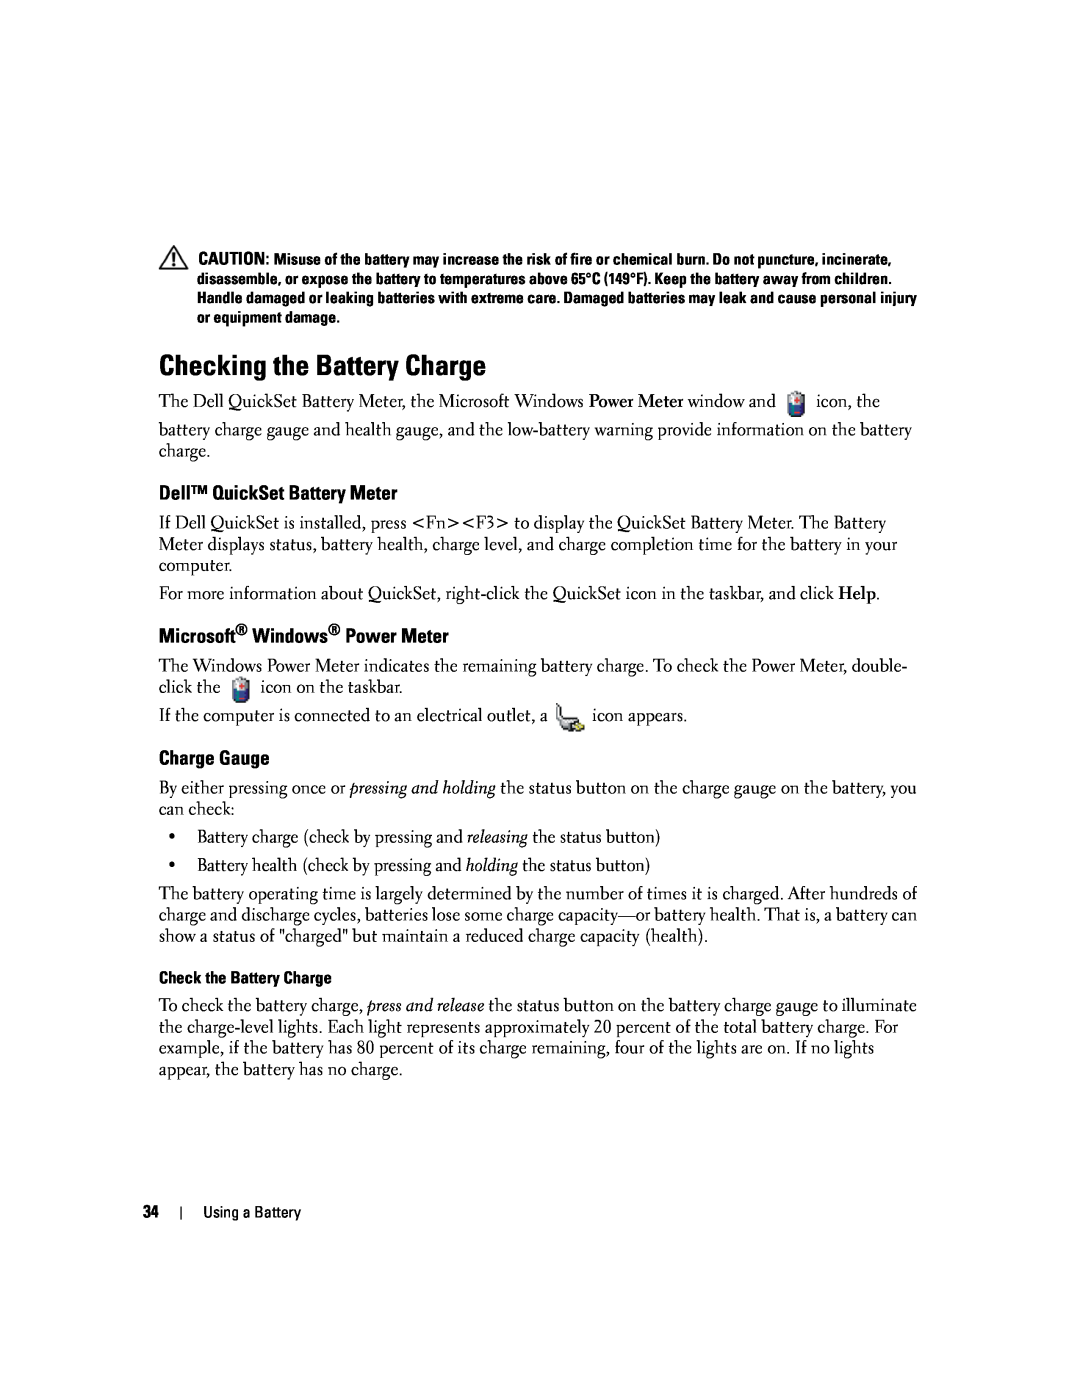 Dell PP24L manual Checking the Battery Charge, Dell QuickSet Battery Meter, Microsoft Windows Power Meter, Charge Gauge 